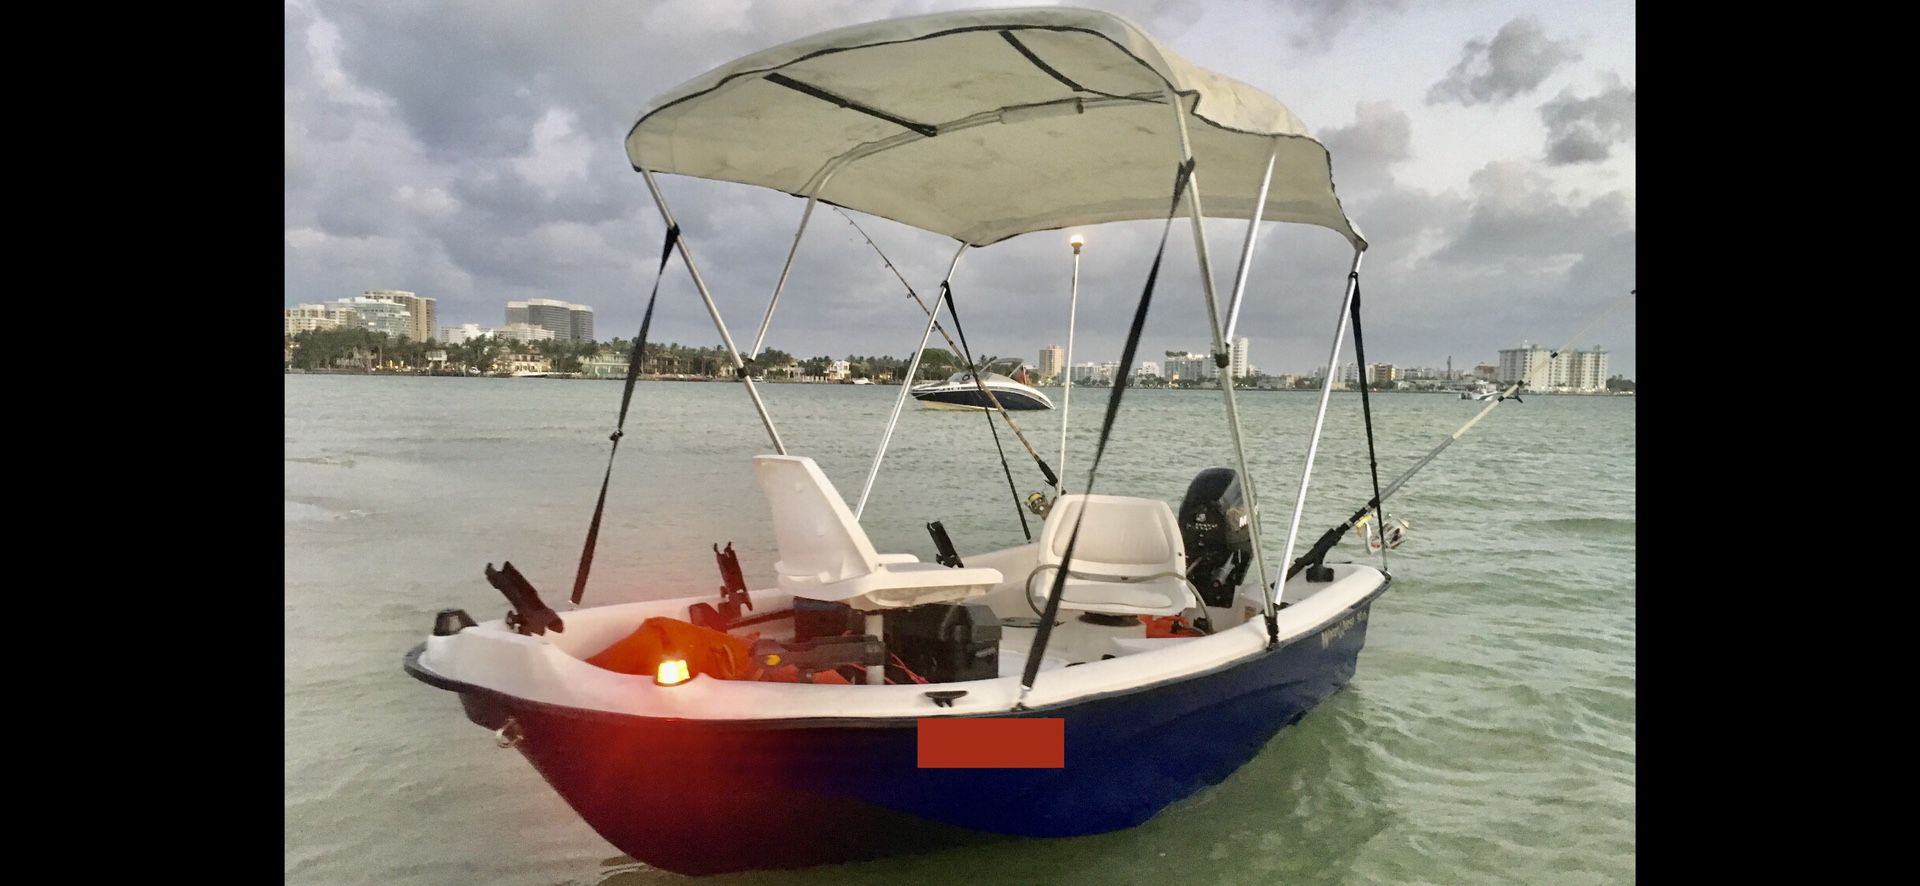 Boat with motor for sale all great condition / family or fishing vesel